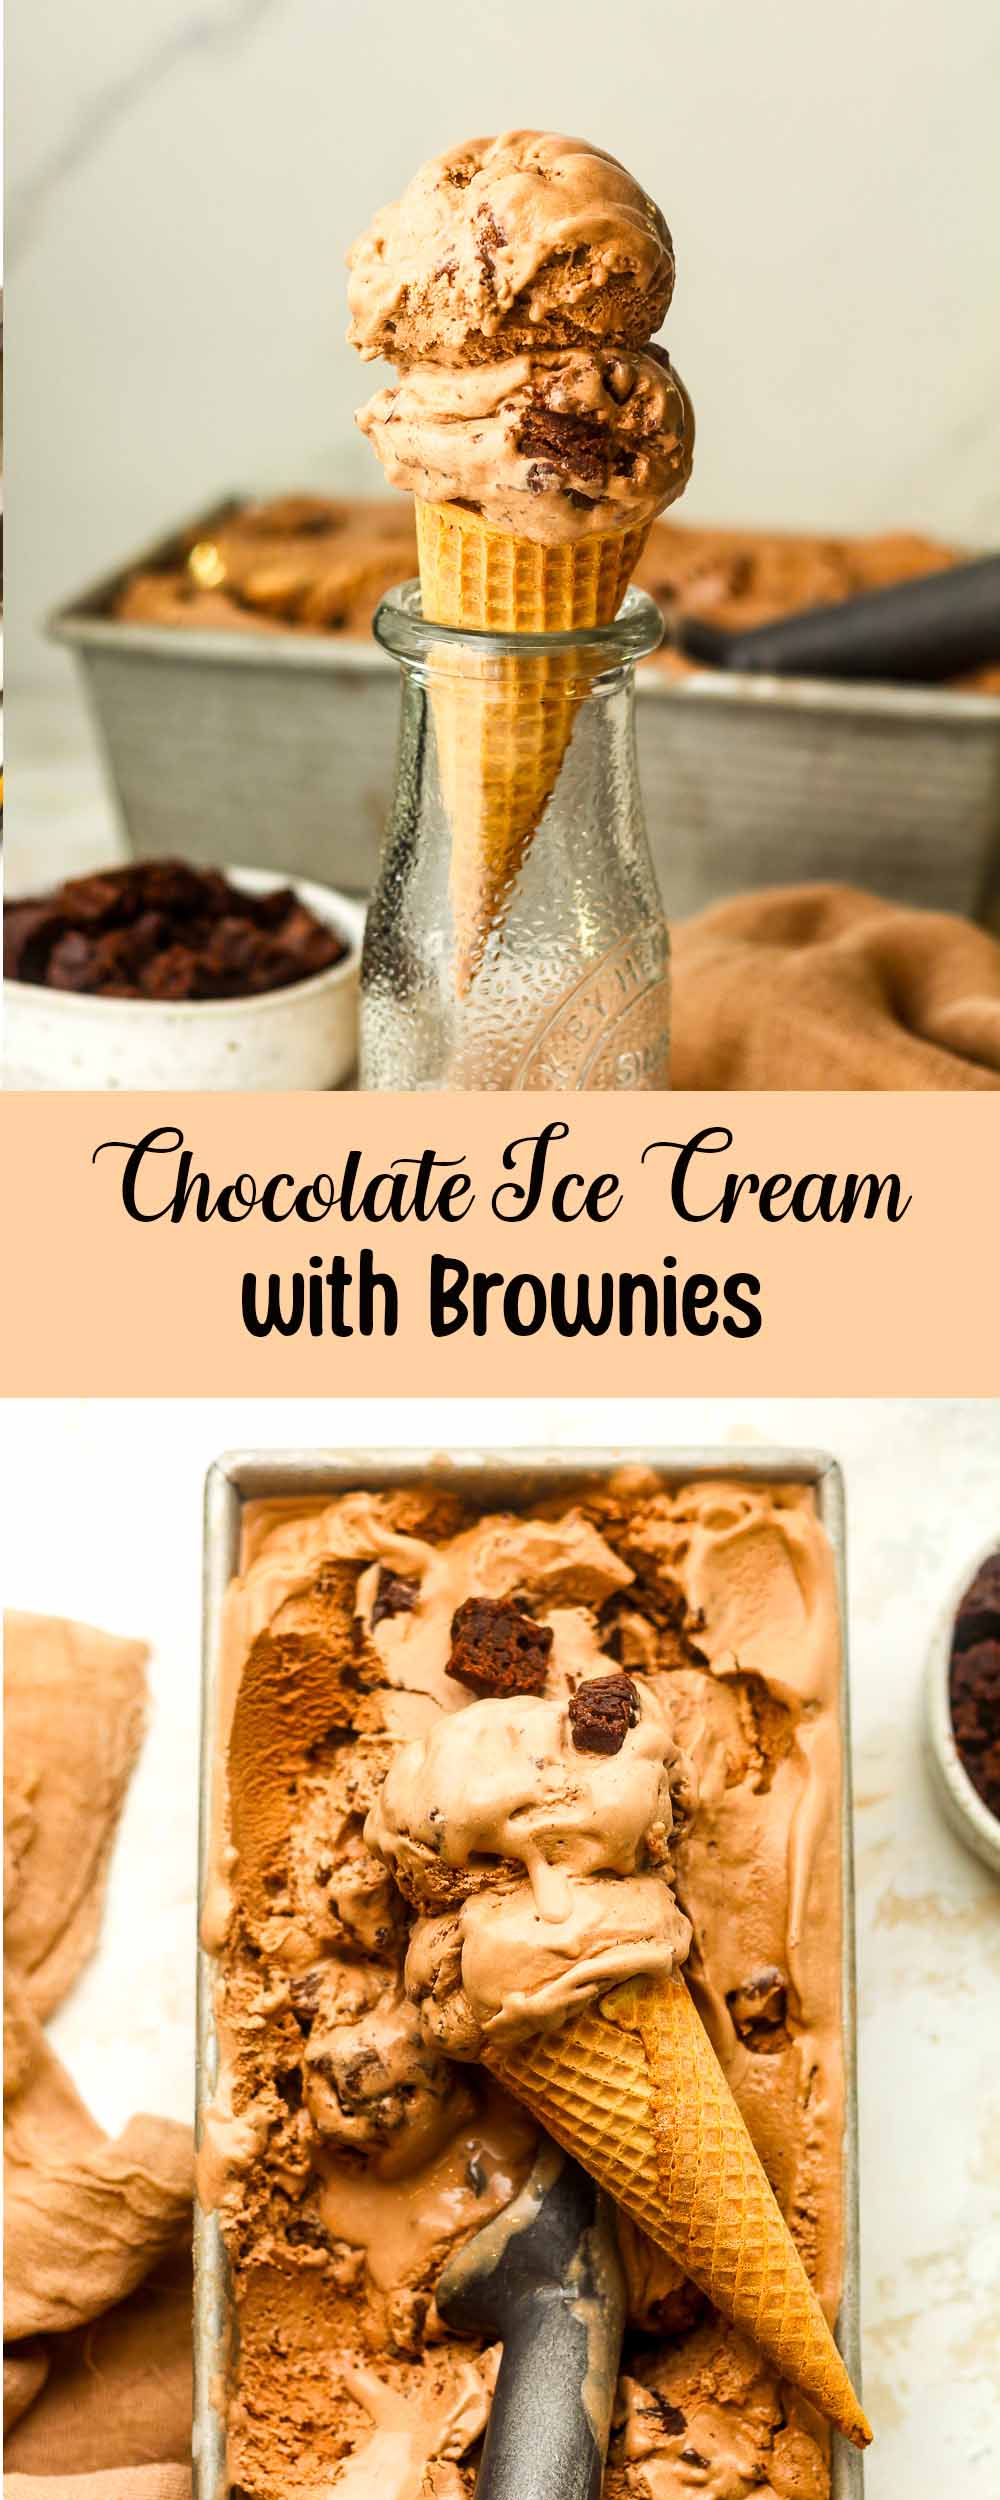 A collage of chocolate ice cream with brownies.